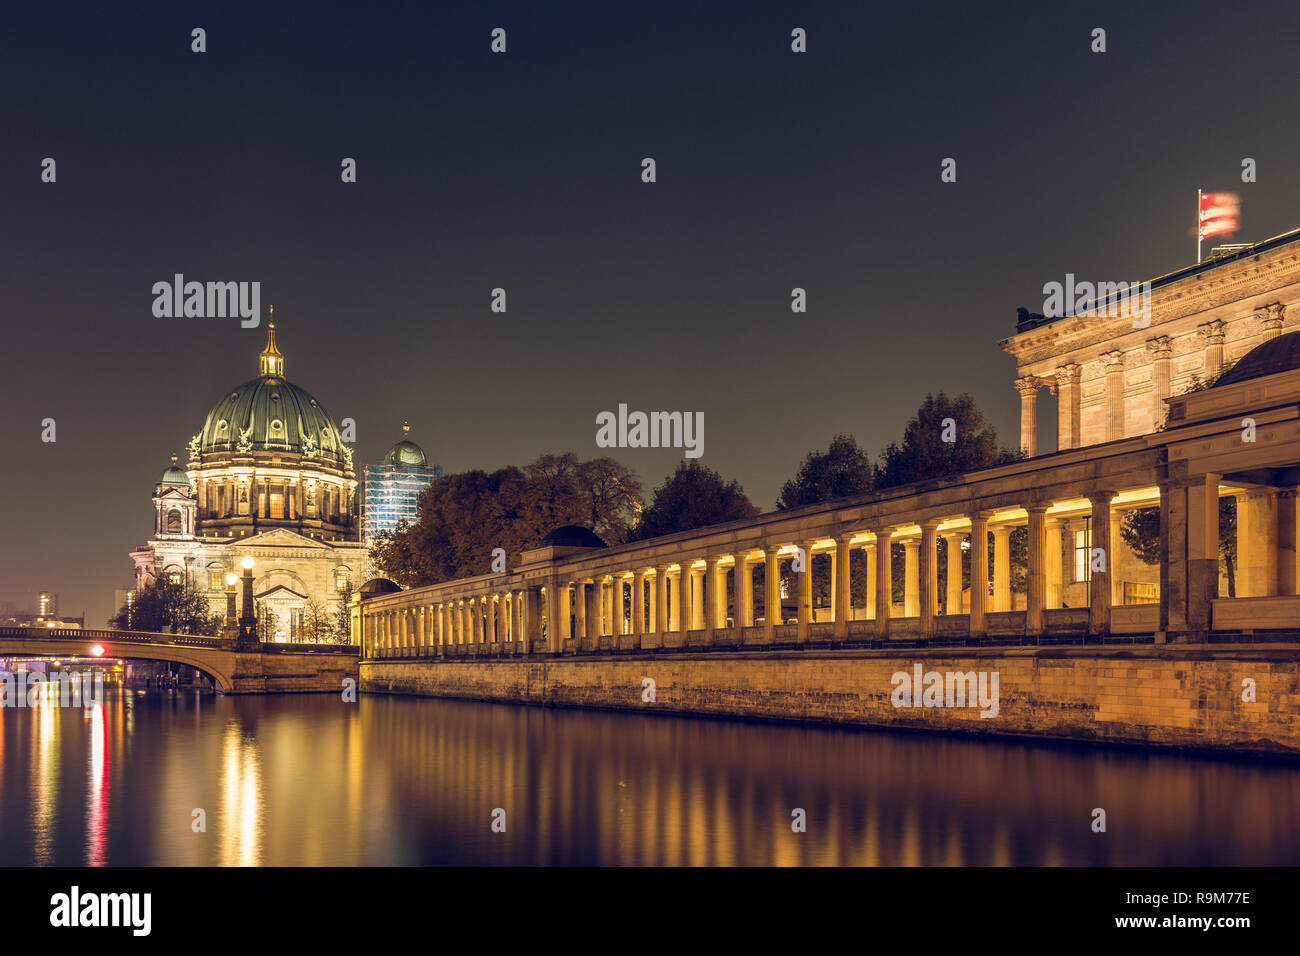 Berlin at night. Berlin Cathedral and the Friedrich's Bridge with lighting and reflections in the river Spree. illuminated arcade of the gallery Stock Photo